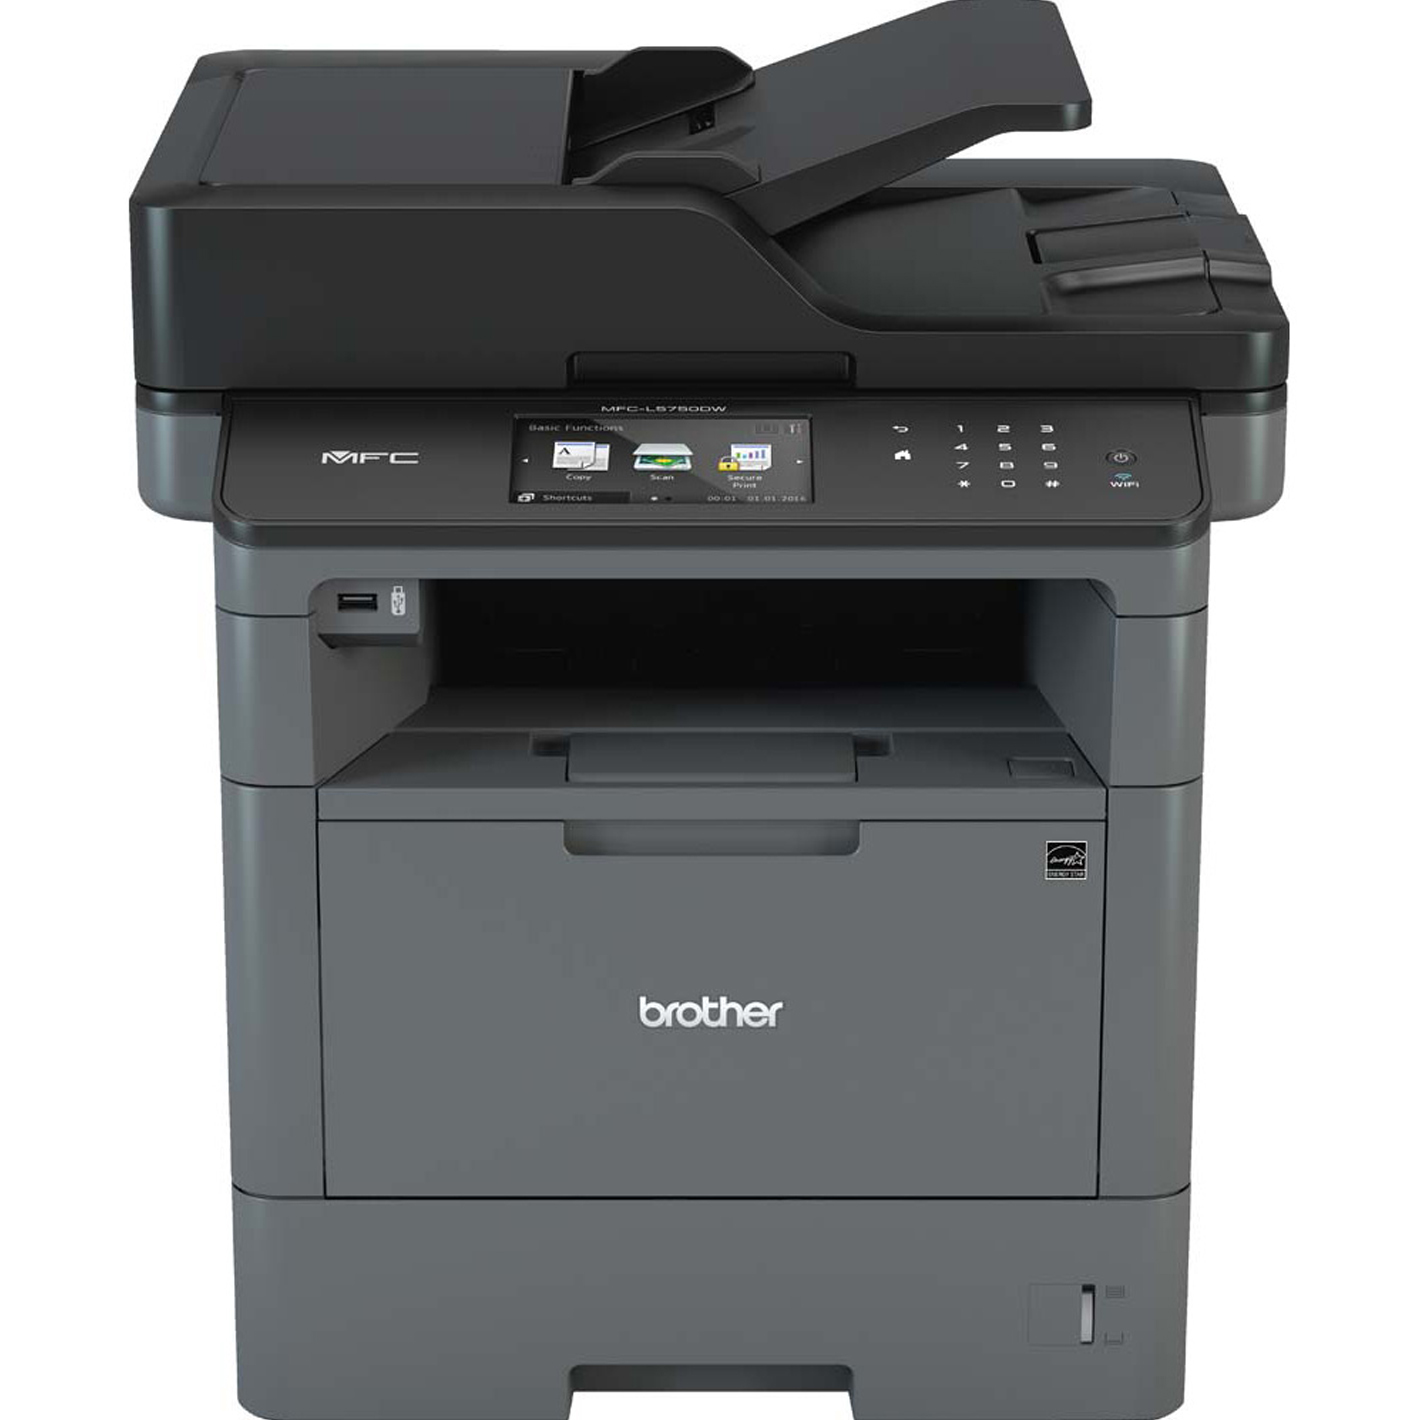 Mfc L5750dw Mfp Las Bn A4 4in1 Brother Multifunction Mono Laser Mfcl5750dwc1 4977766753951